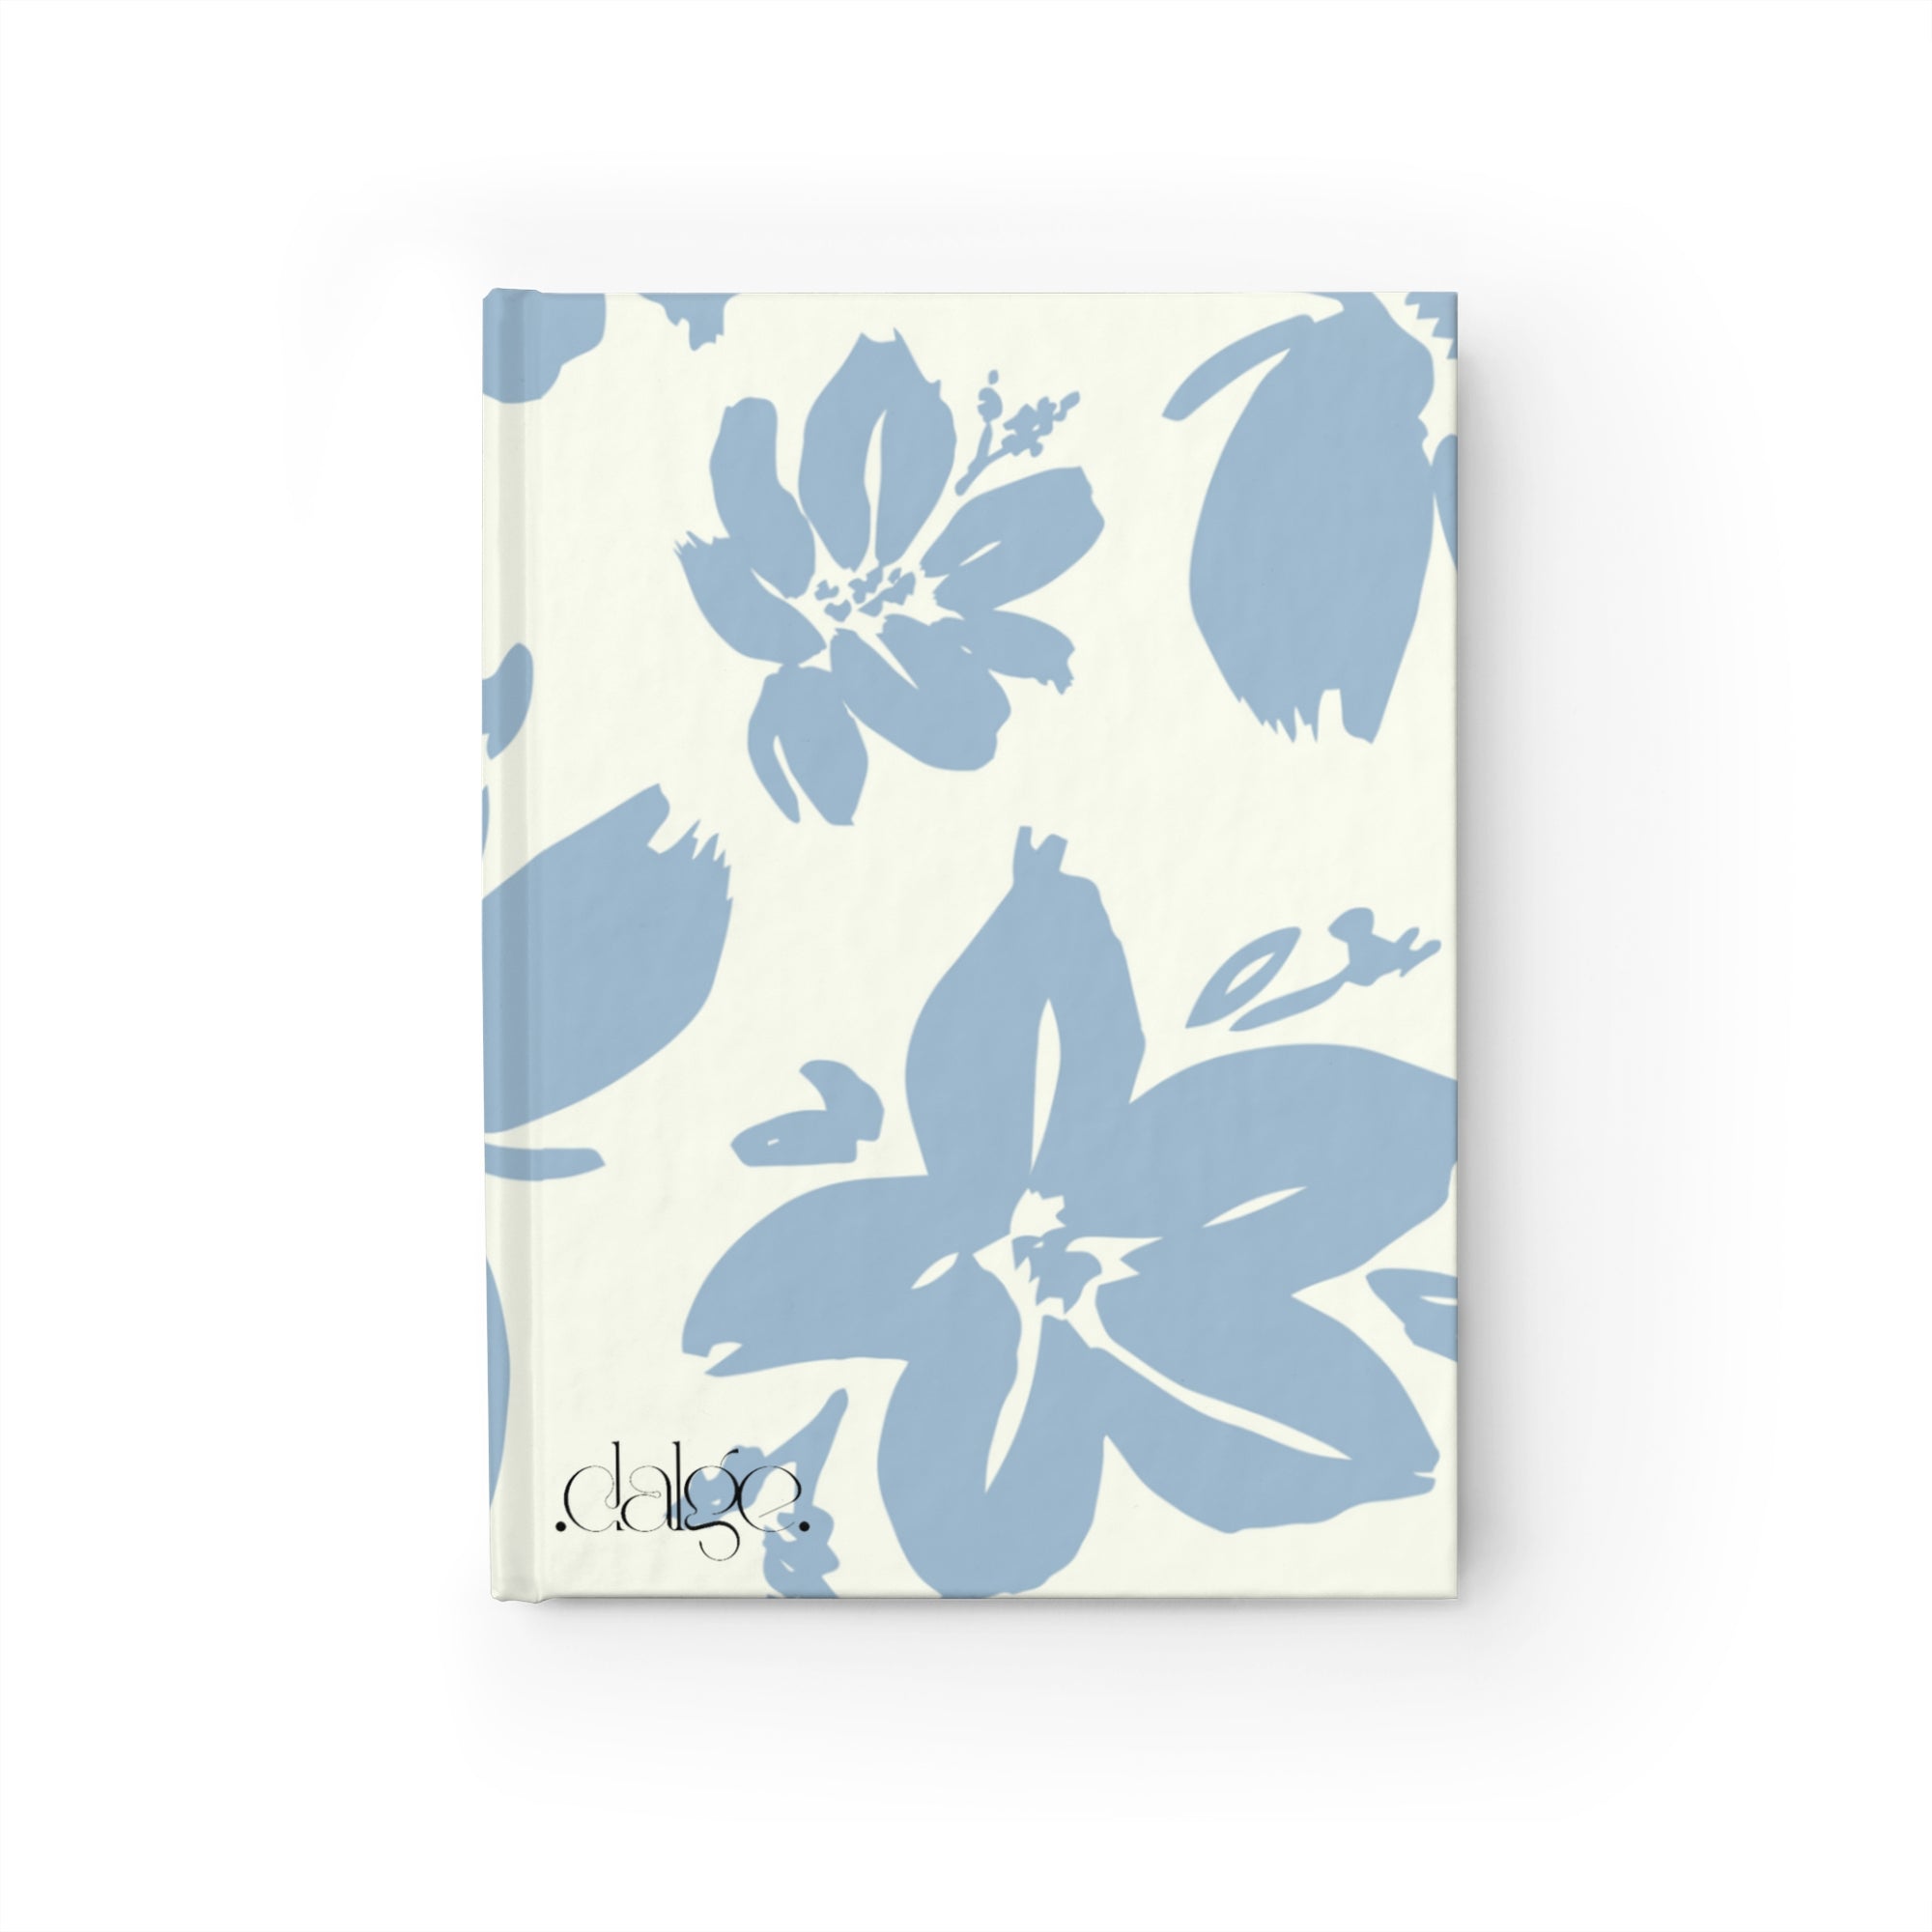 Cream Blue Aesthetic Pastel Floral Hard Cover Journal, Notebook, Blank Journal.vintage journal, Writers journal, writing, Designed journal-gifts.-Paper products-Dalge